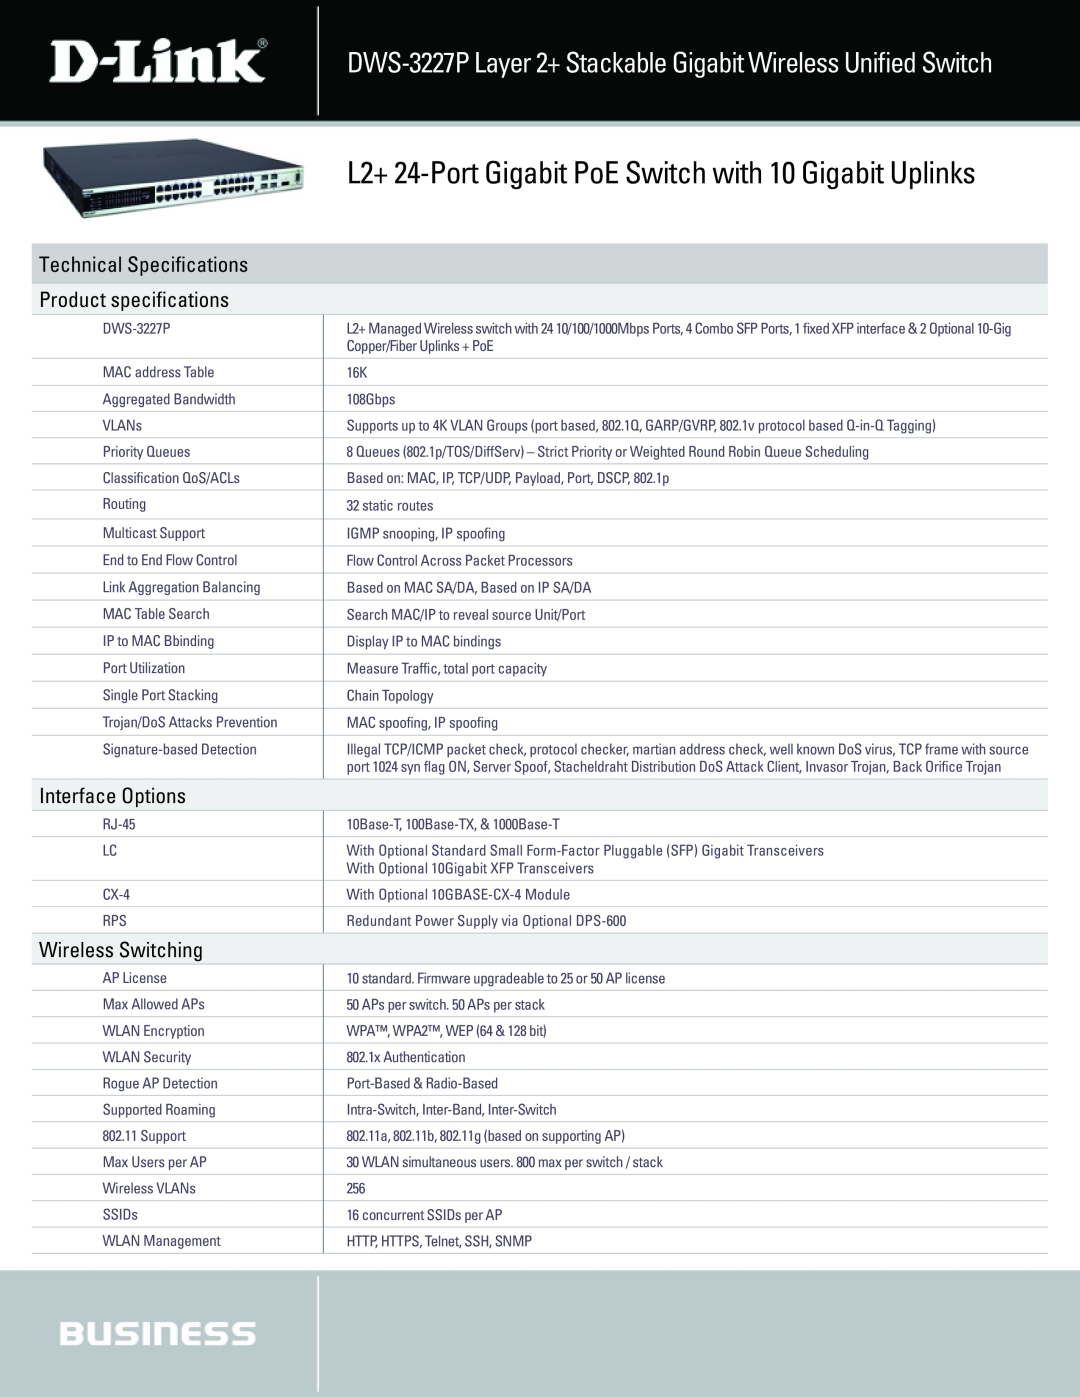 D-Link DWS-3227 L2+ 24-Port Gigabit PoE Switch with 10 Gigabit Uplinks, Technical Speciﬁcations, Product speciﬁcations 